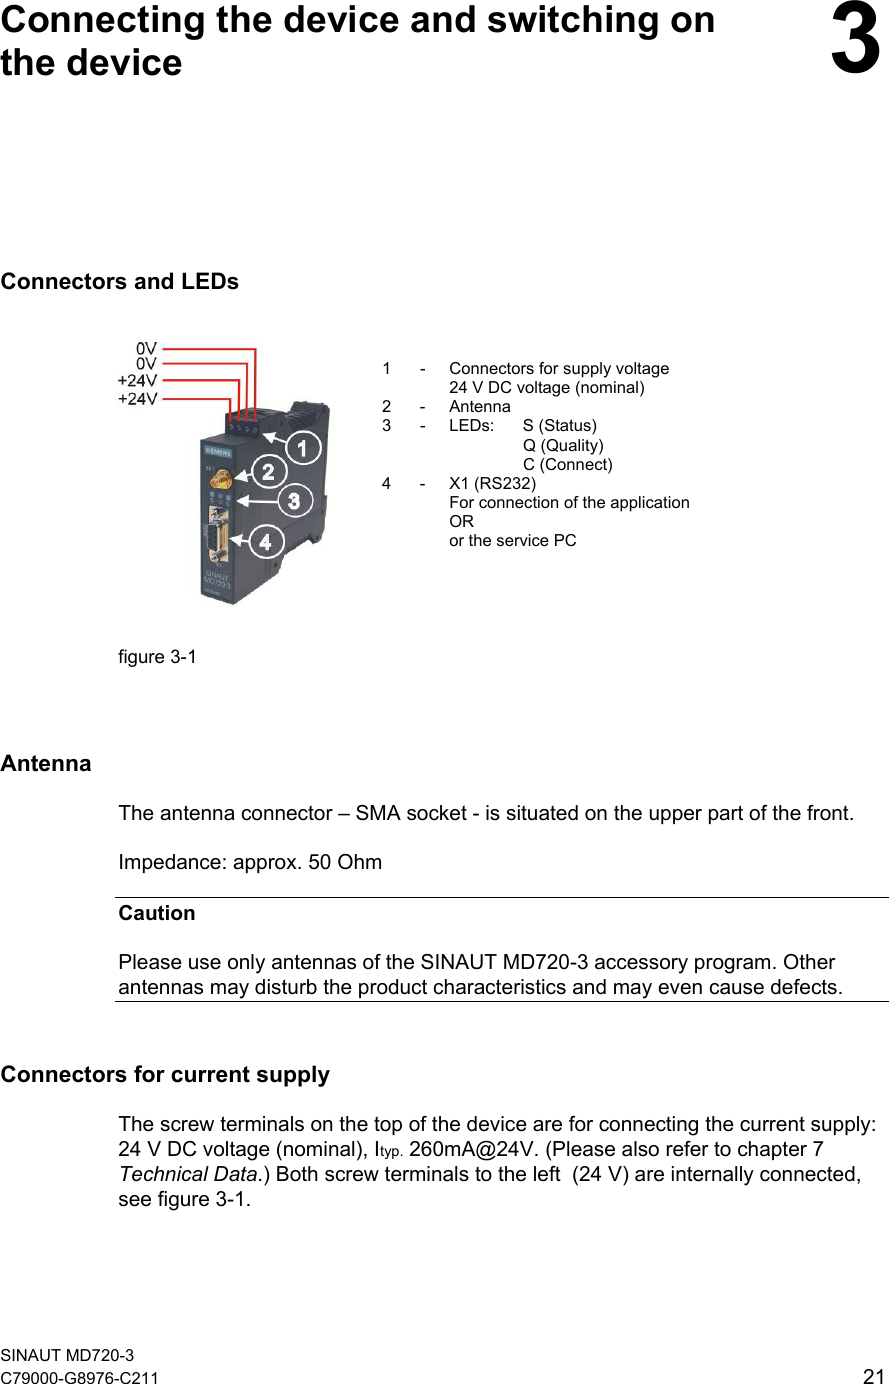   Connecting the device and switching on the device  3Connectors and LEDs       1  -  Connectors for supply voltage 24 V DC voltage (nominal) 2 - Antenna 3 - LEDs: S (Status)  Q (Quality)  C (Connect) 4 - X1 (RS232) For connection of the application OR or the service PC   figure 3-1    Antenna The antenna connector – SMA socket - is situated on the upper part of the front.  Impedance: approx. 50 Ohm Caution Please use only antennas of the SINAUT MD720-3 accessory program. Other antennas may disturb the product characteristics and may even cause defects.   Connectors for current supply The screw terminals on the top of the device are for connecting the current supply:  24 V DC voltage (nominal), Ityp. 260mA@24V. (Please also refer to chapter 7 Technical Data.) Both screw terminals to the left  (24 V) are internally connected, see figure 3-1. SINAUT MD720-3 C79000-G8976-C211   21 